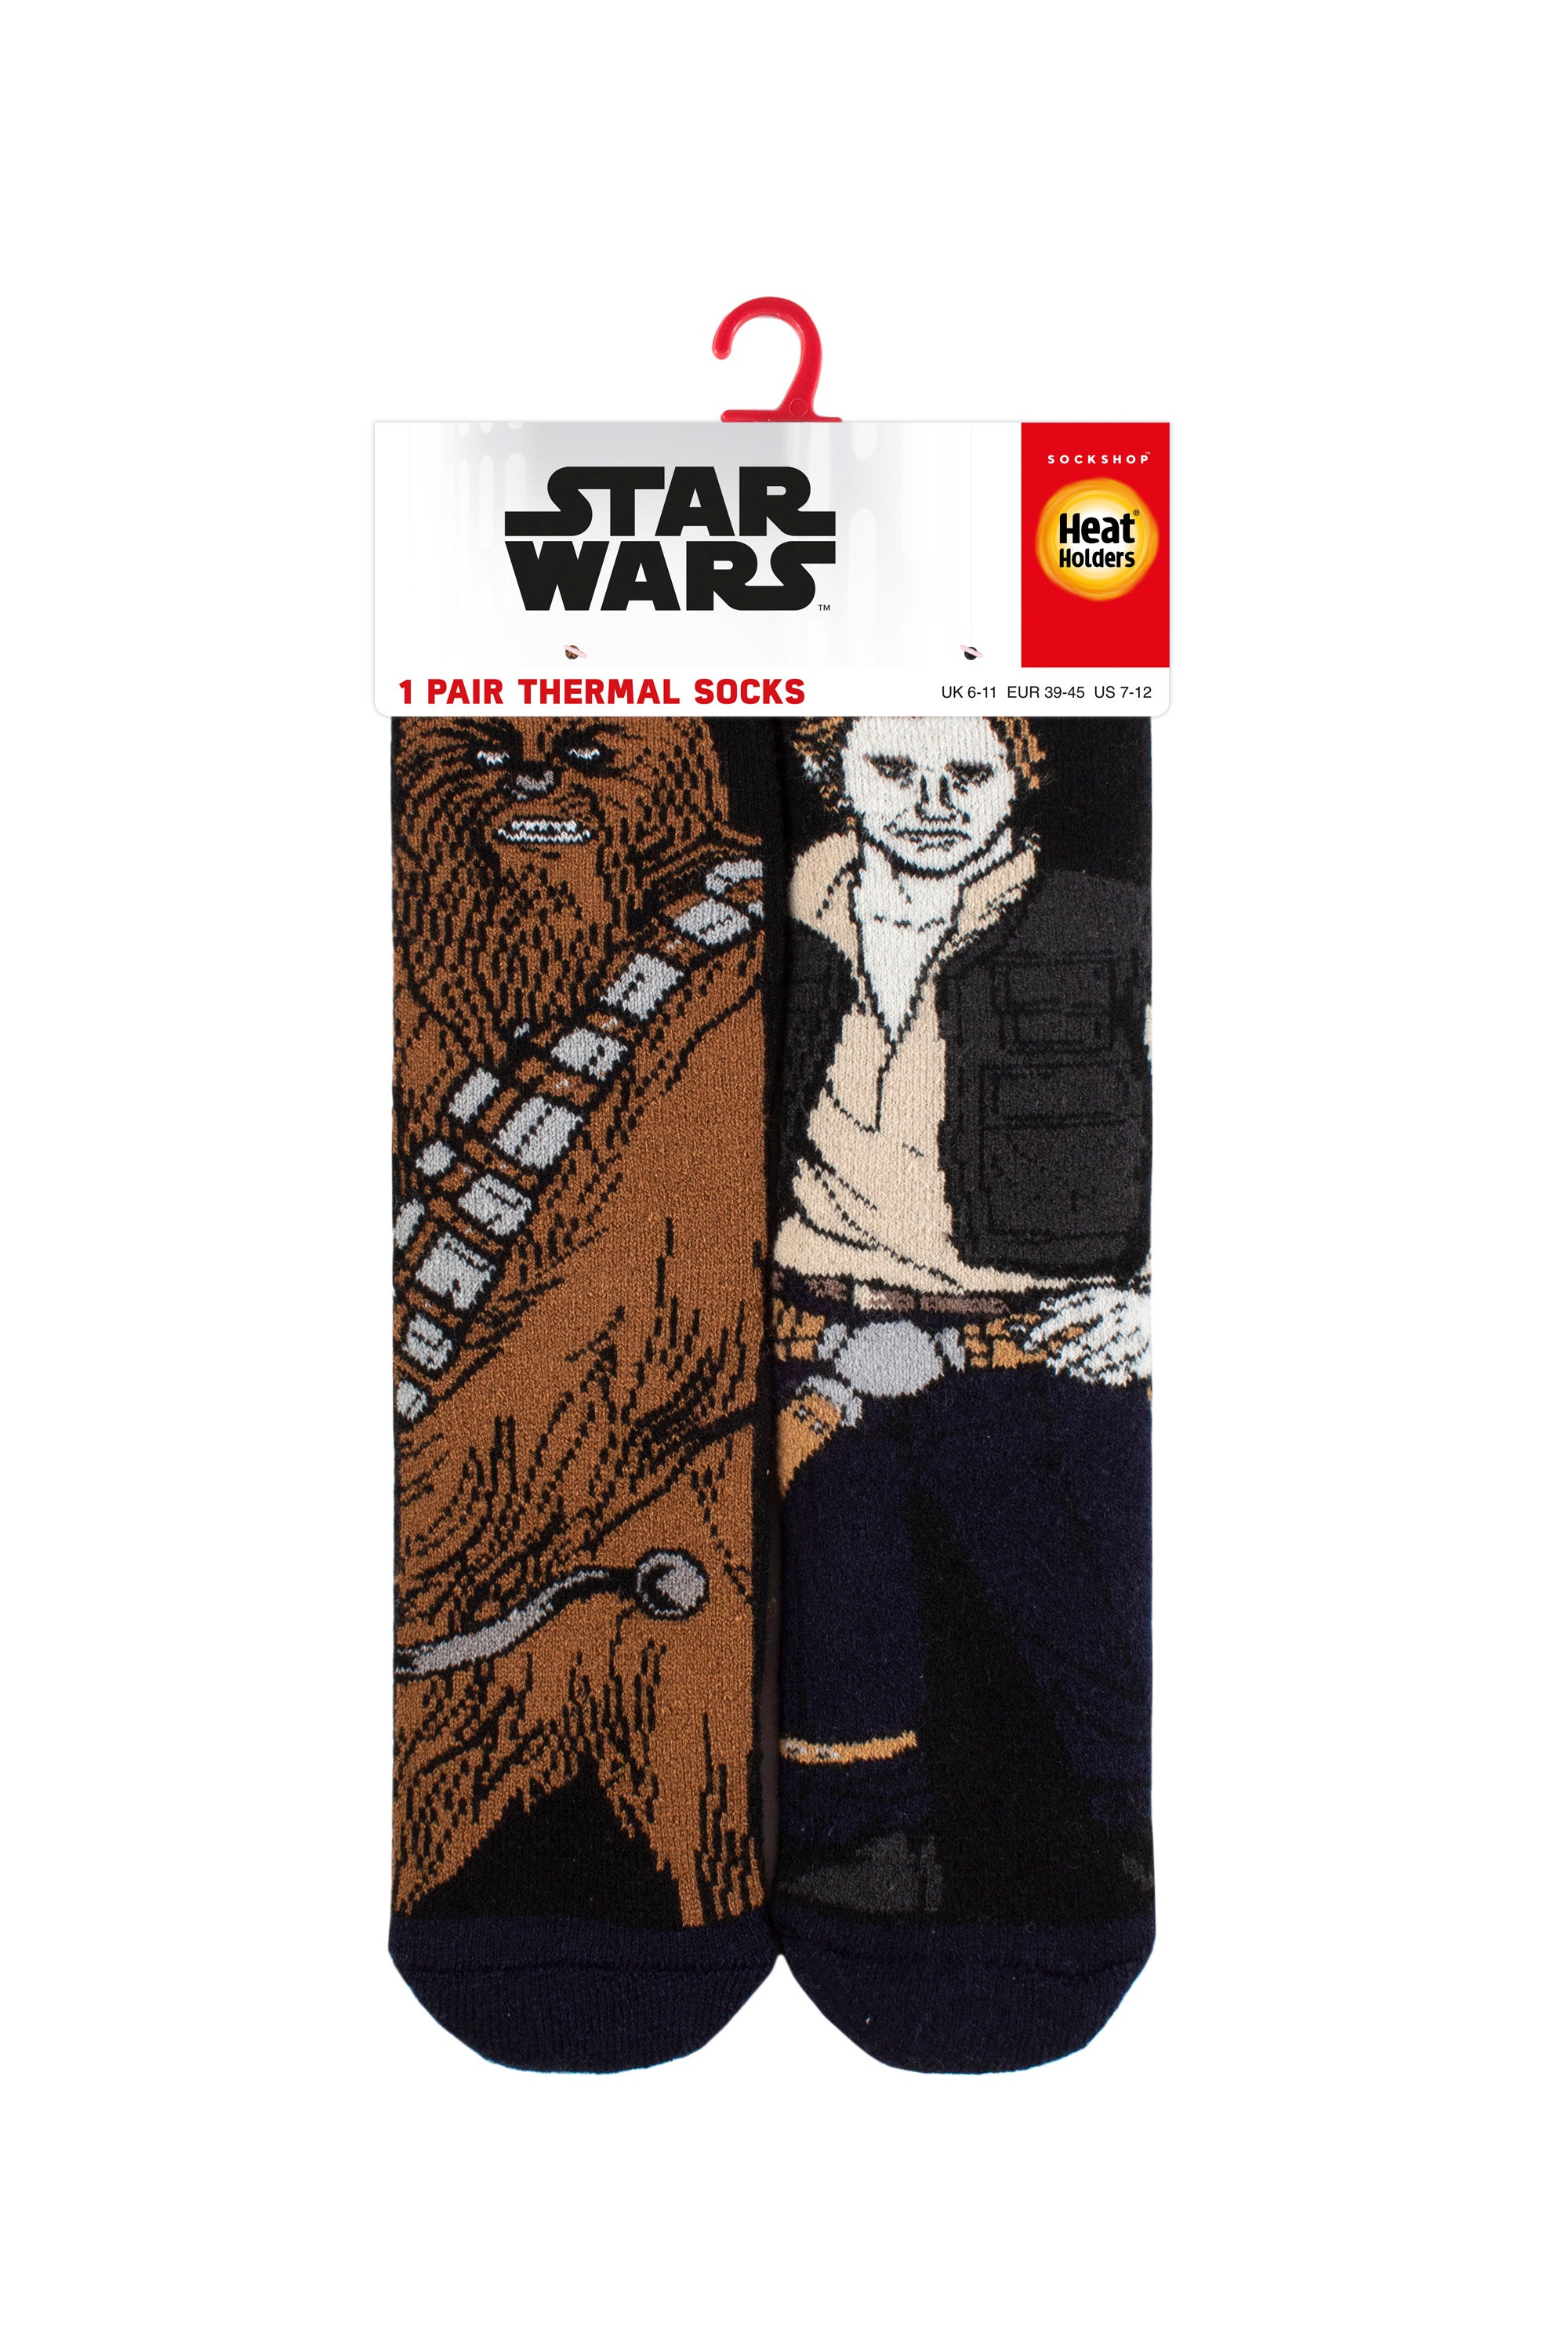 HEAT HOLDERS Lite Licensed Star Wars Character Socks-Chewie and Hans Solo-Mens 6-11